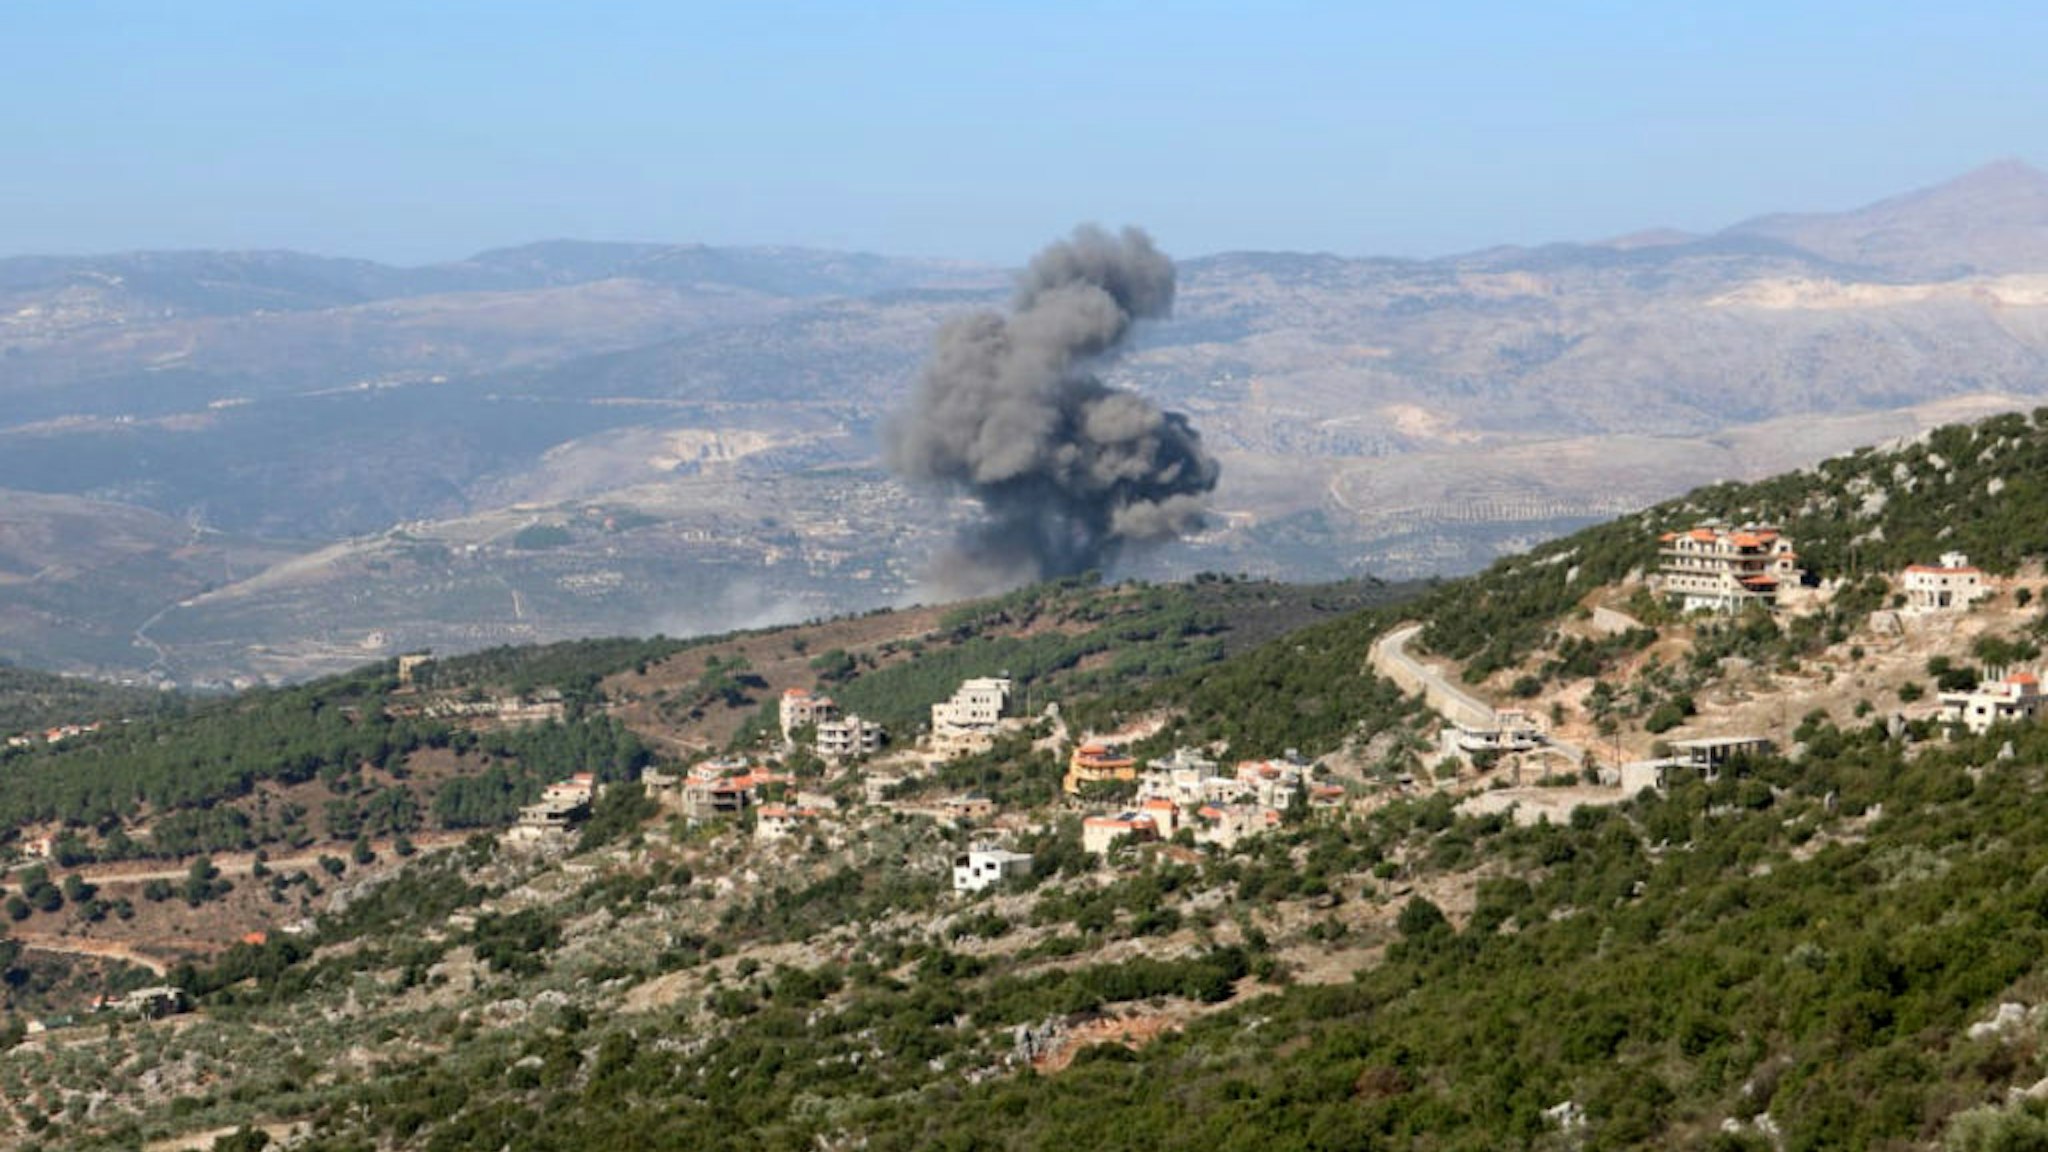 NABATIEH, LEBANON - NOVEMBER 04: Smoke rises after Israeli airstrike on the mountainous areas around Rachaya Al Foukhar and Kfarhamam villages of Hasbaya District of the Nabatieh Governorate in Lebanon on November 04, 2023. Israel and Lebanon are reported to have exchanged attacks on their border.